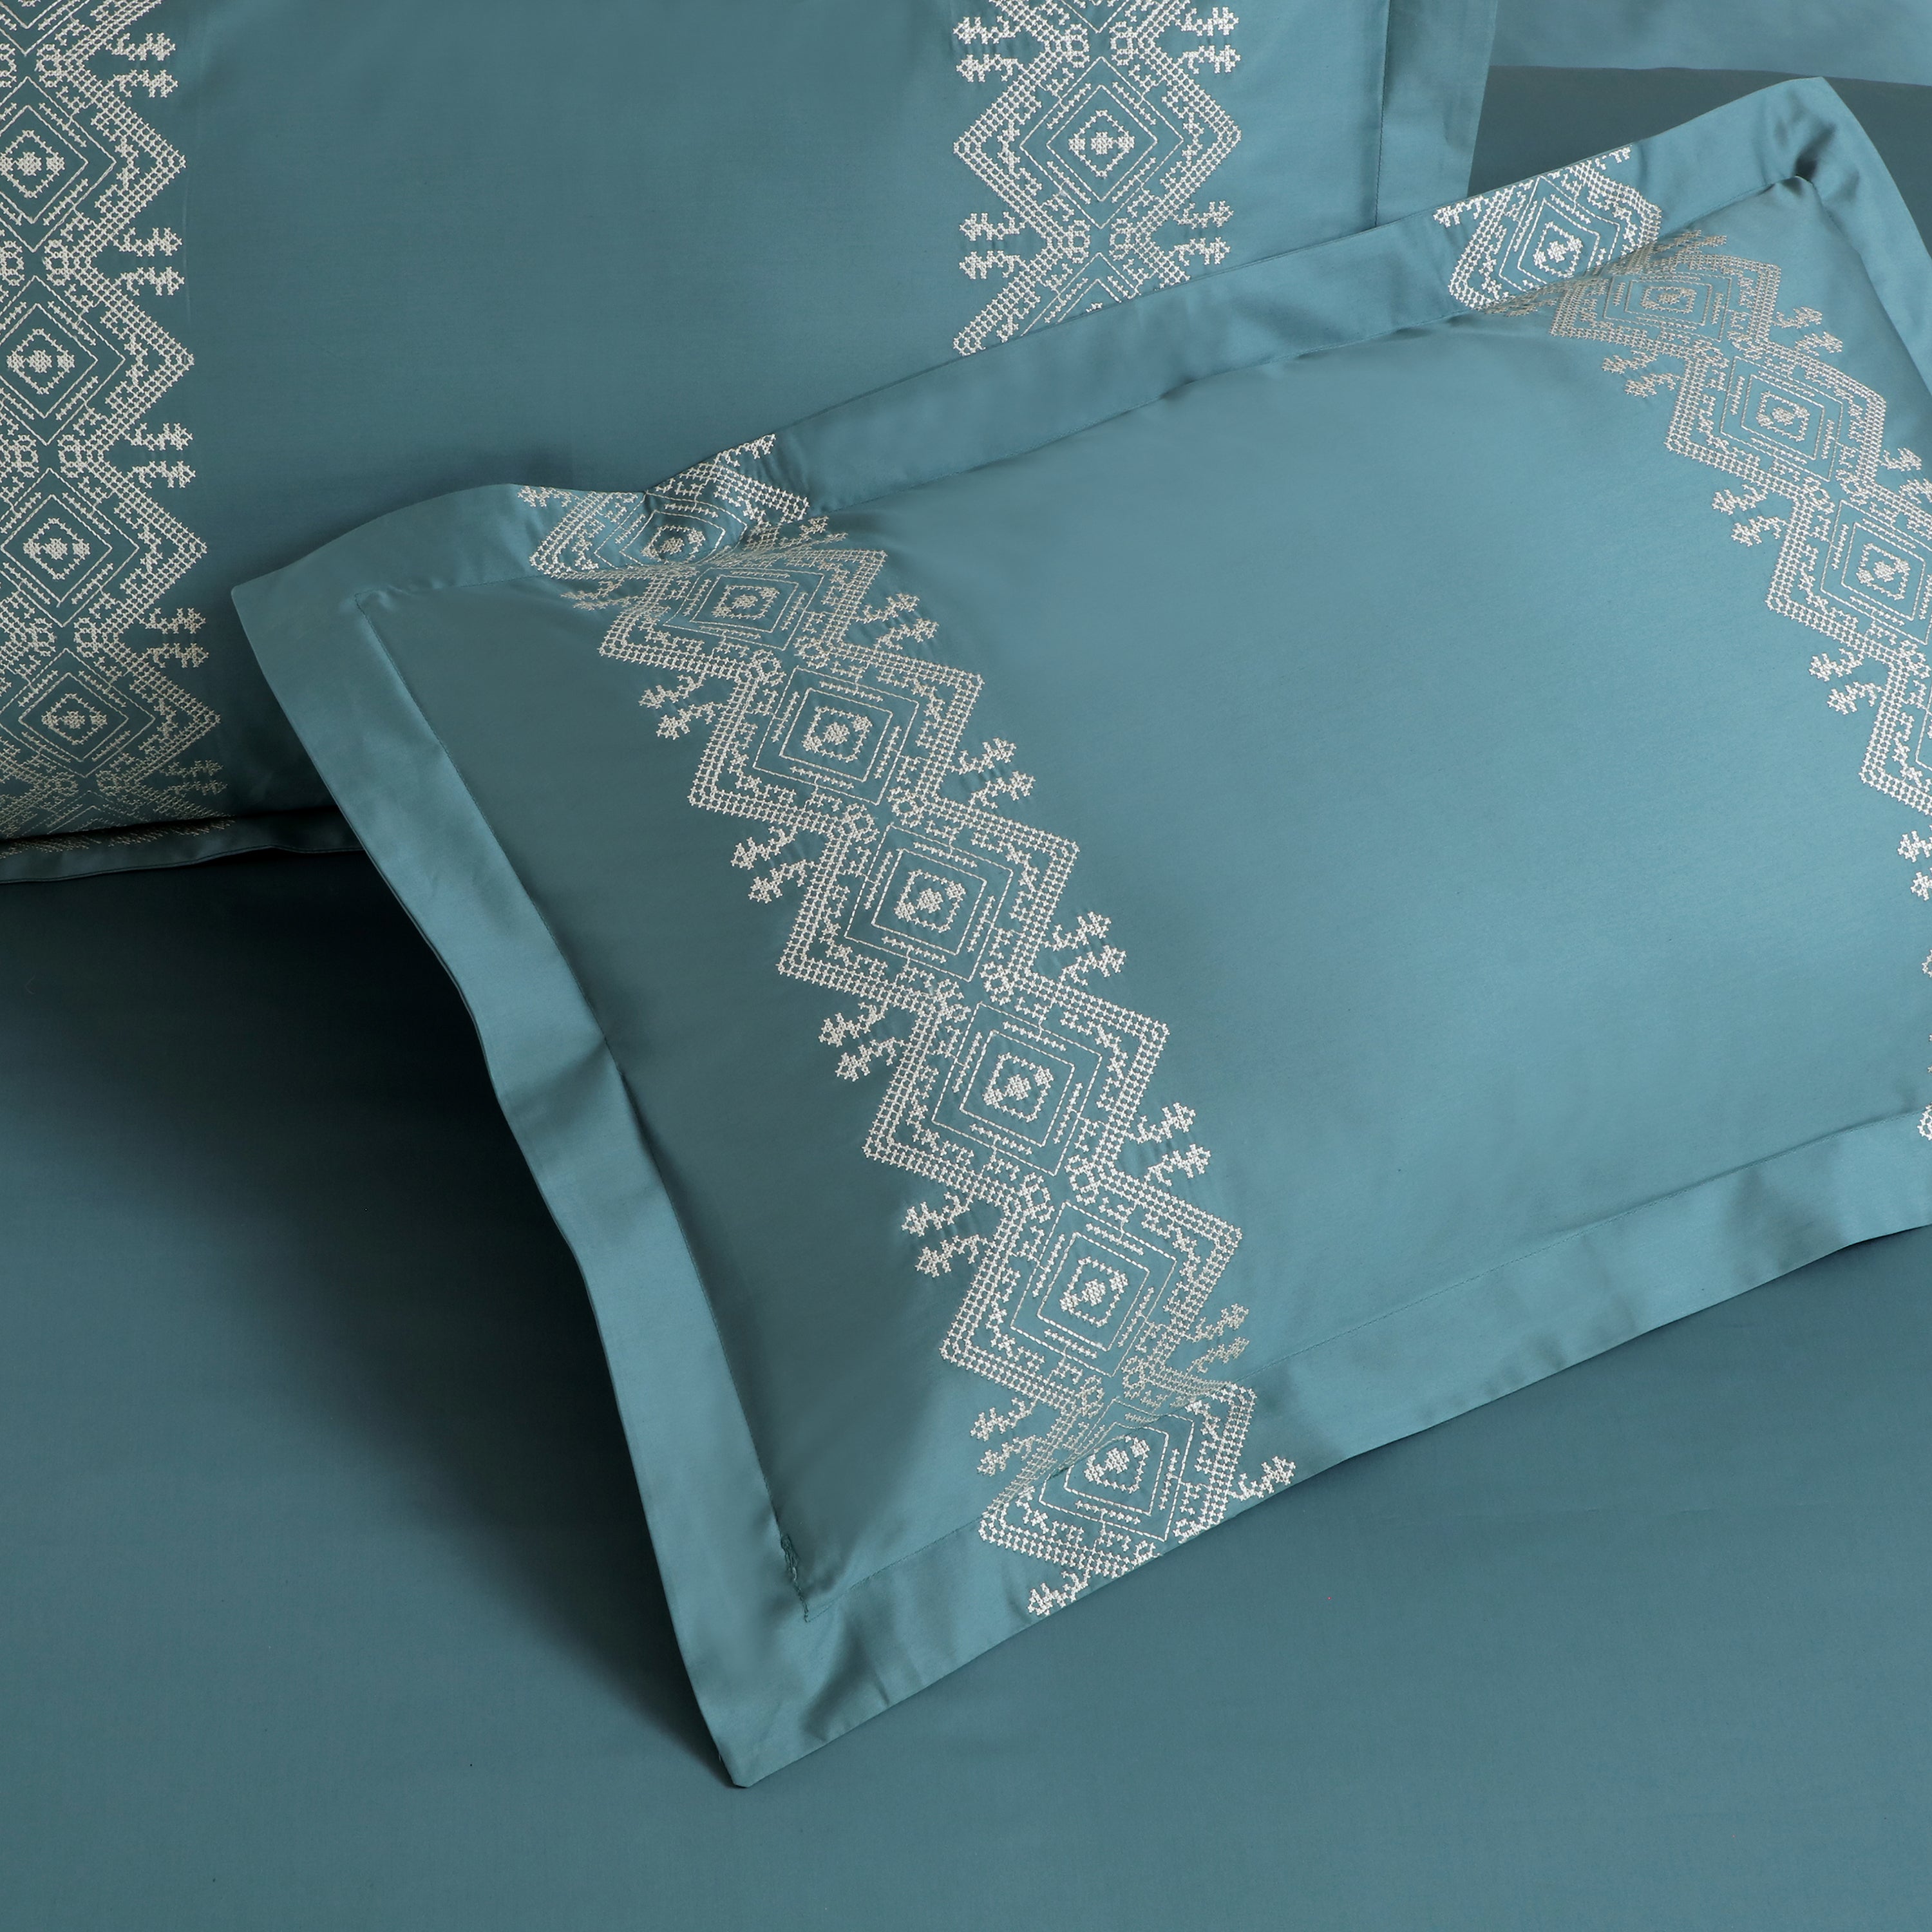 Malako Luxe Collection: 550 TC Teal Green Premium Embroidered Bedding